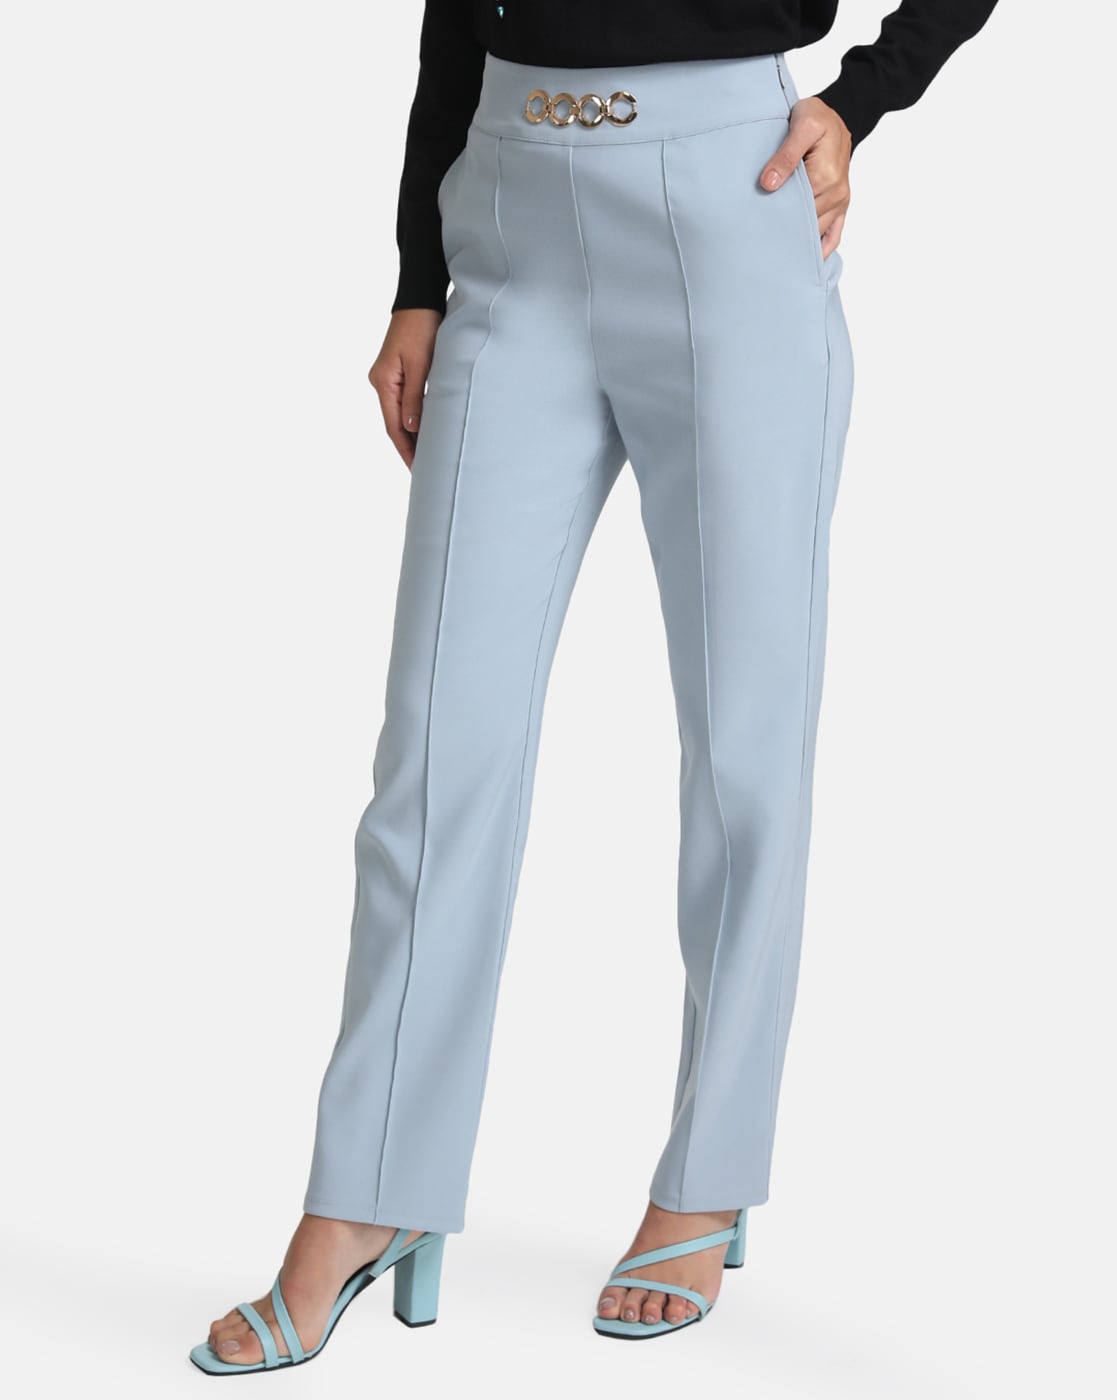 Xenos Classic Scrub Pant in Ceil Blue - Women's Pants by Jaanuu